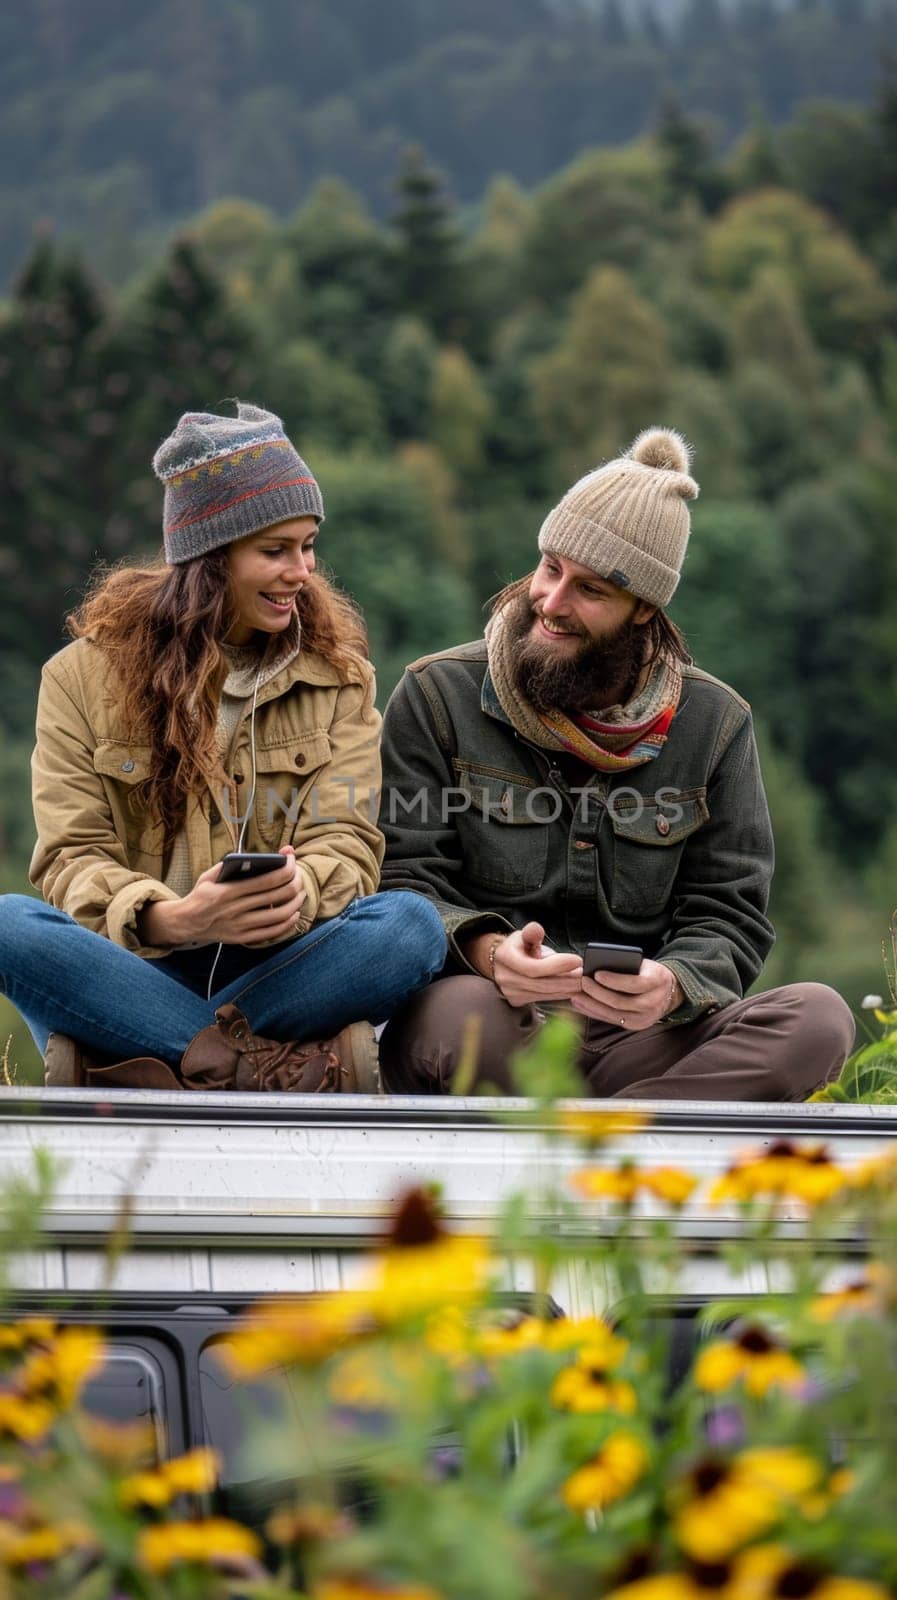 A man and woman sitting on top of a van looking at their cell phones, AI by starush